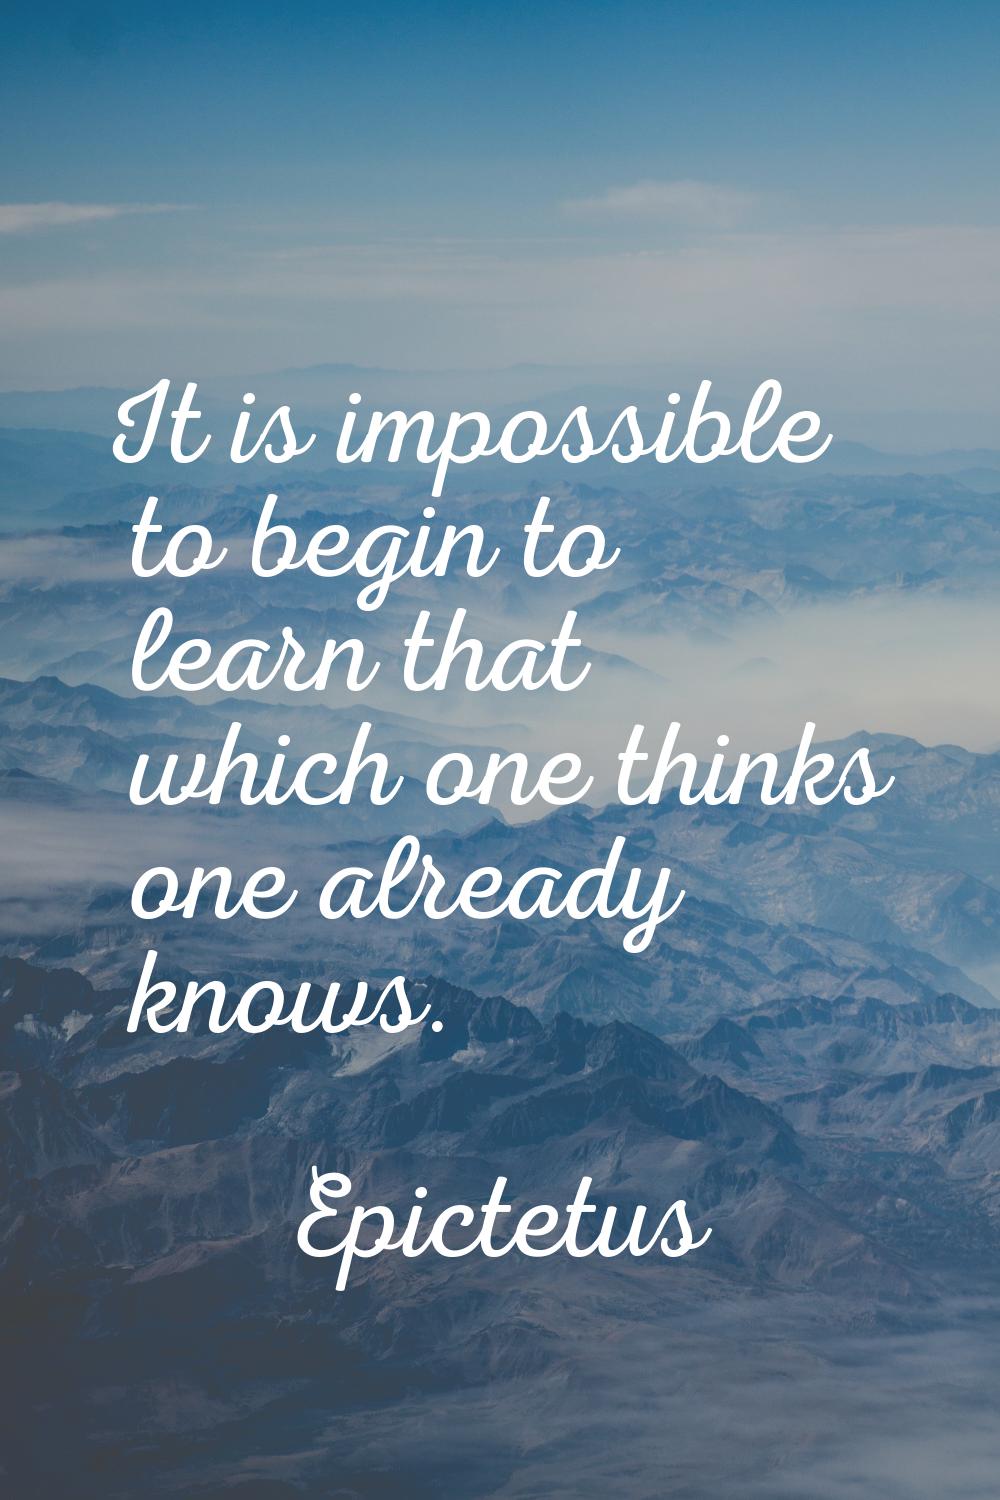 It is impossible to begin to learn that which one thinks one already knows.